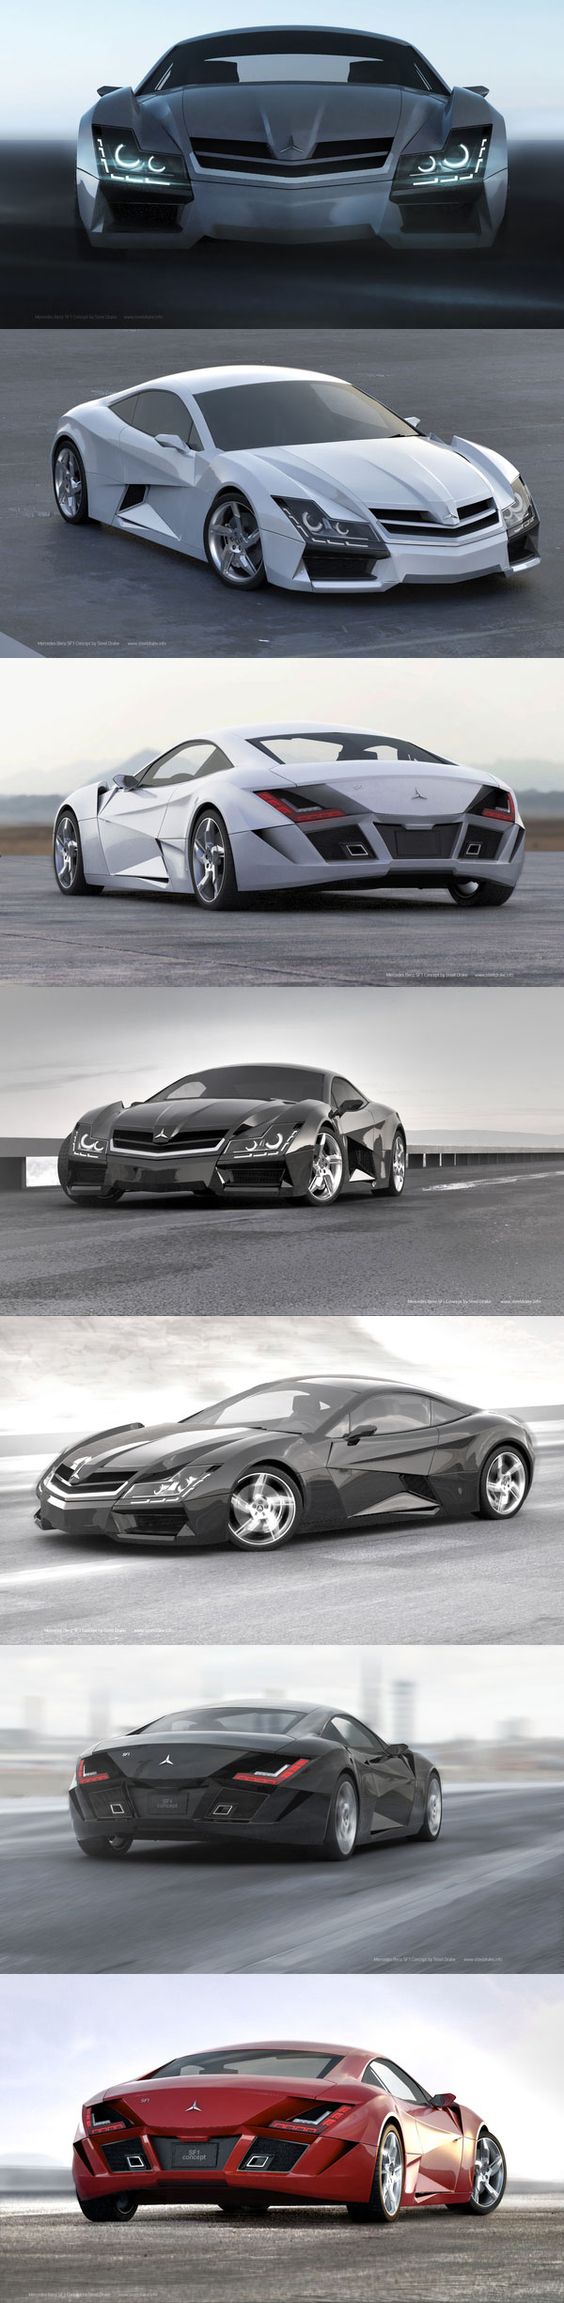 Awesome Cars ‘’ Mercedes super car concept ‘’ Cars Design And Concepts, Best Of New Cars